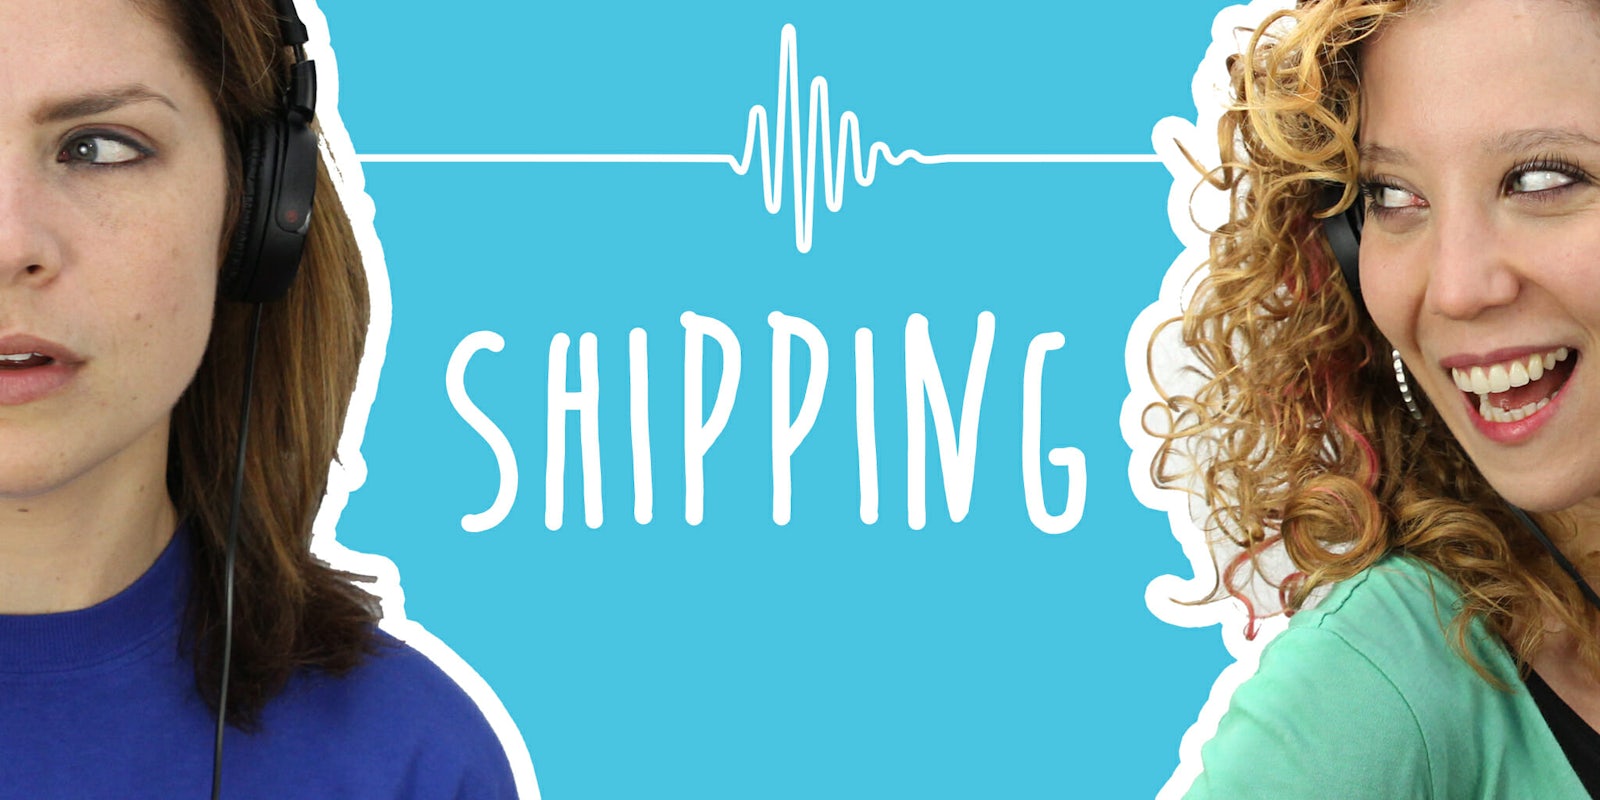 2 Girls 1 Podcast shipping fanfiction